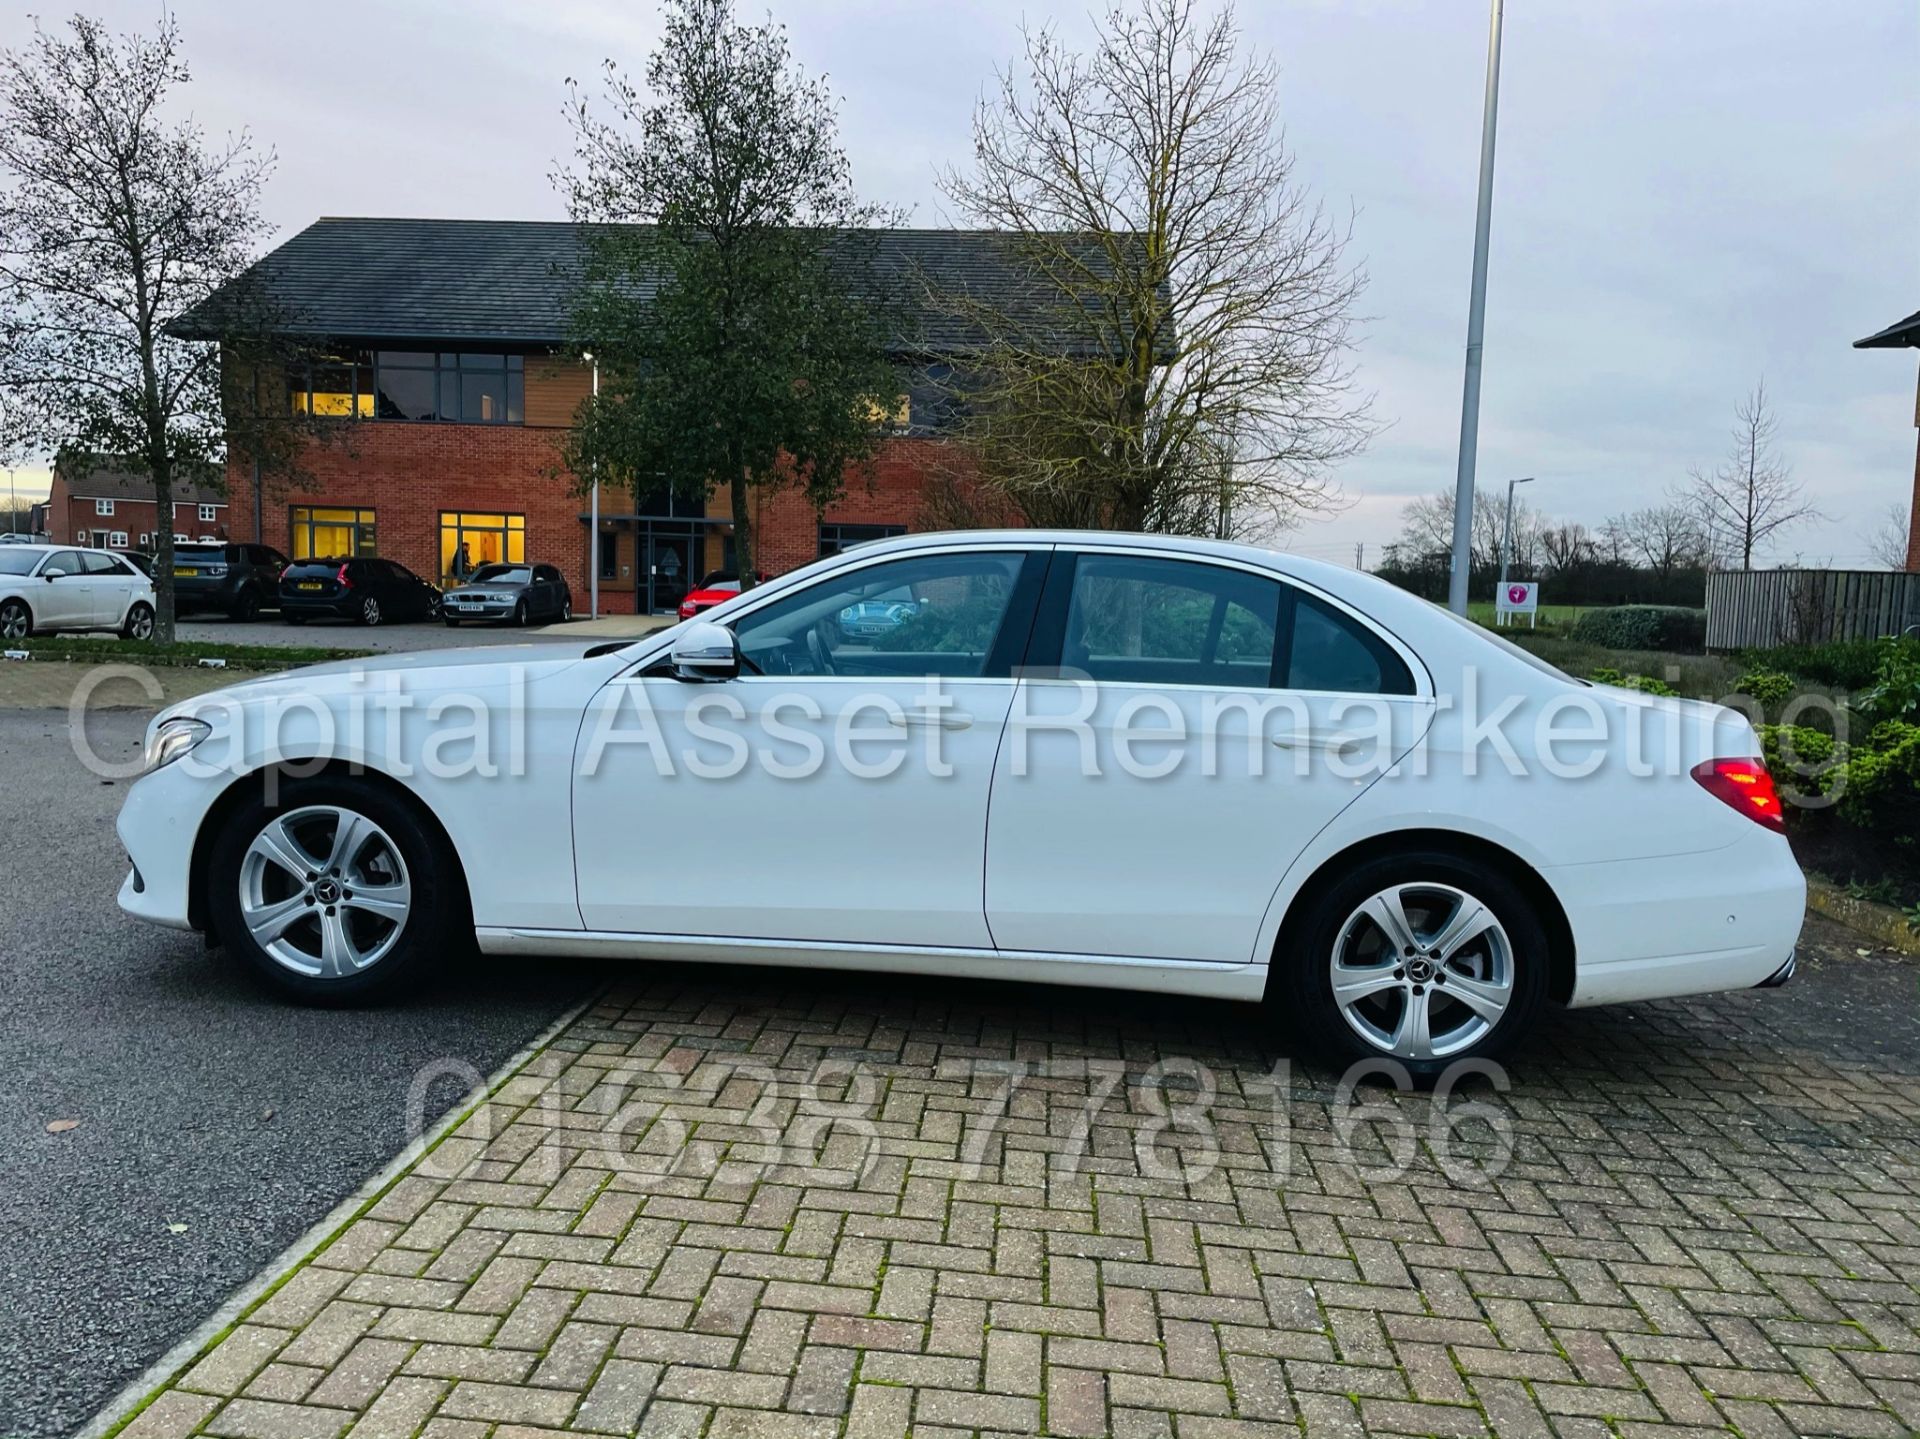 (ON SALE) MERCEDES-BENZ E220D *SALOON* (2018 - NEW MODEL) '9-G TRONIC AUTO - LEATHER - SAT NAV' - Image 8 of 50